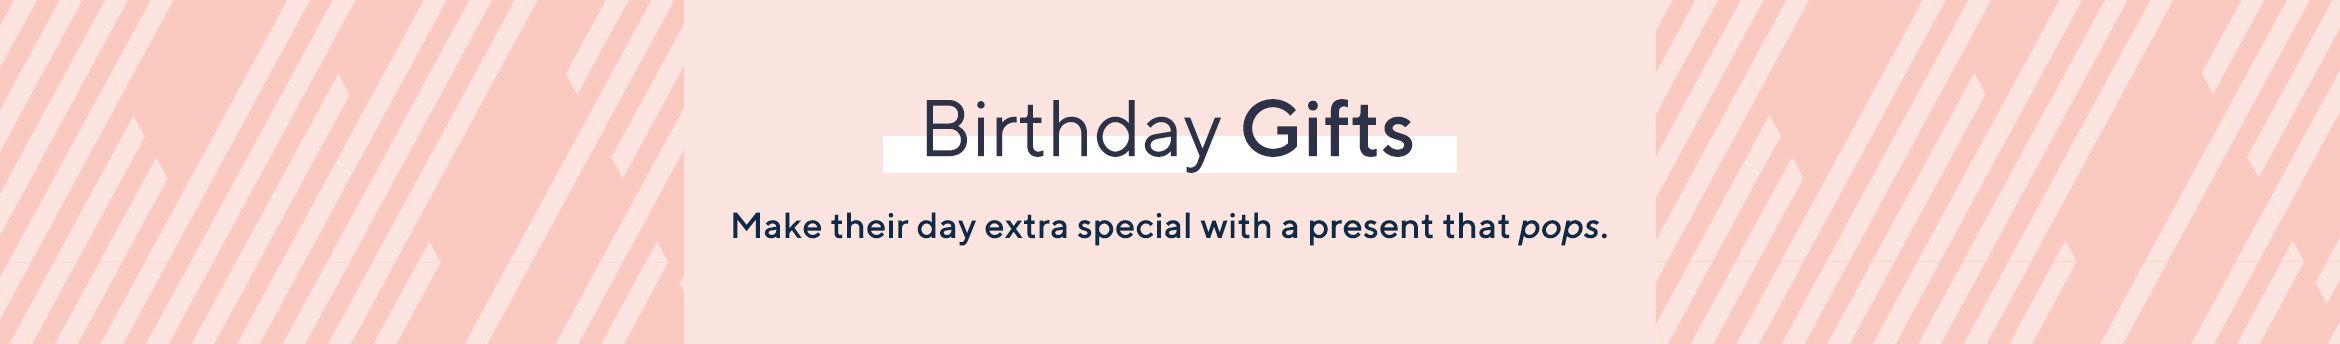 Birthday Gifts Make their day extra special with a present that pops.